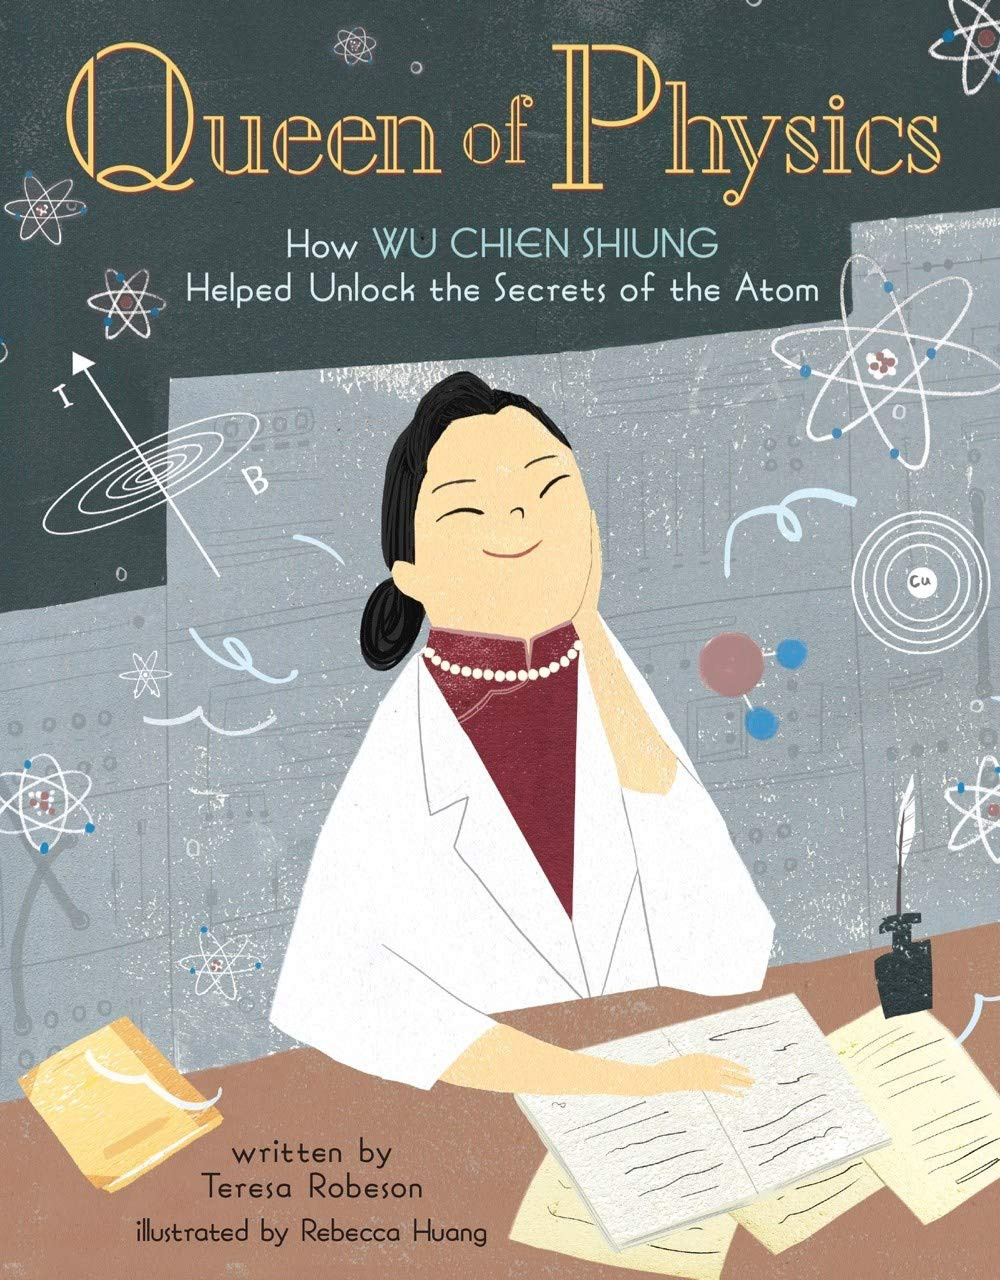 Queen of Physics by Teresa Robeson